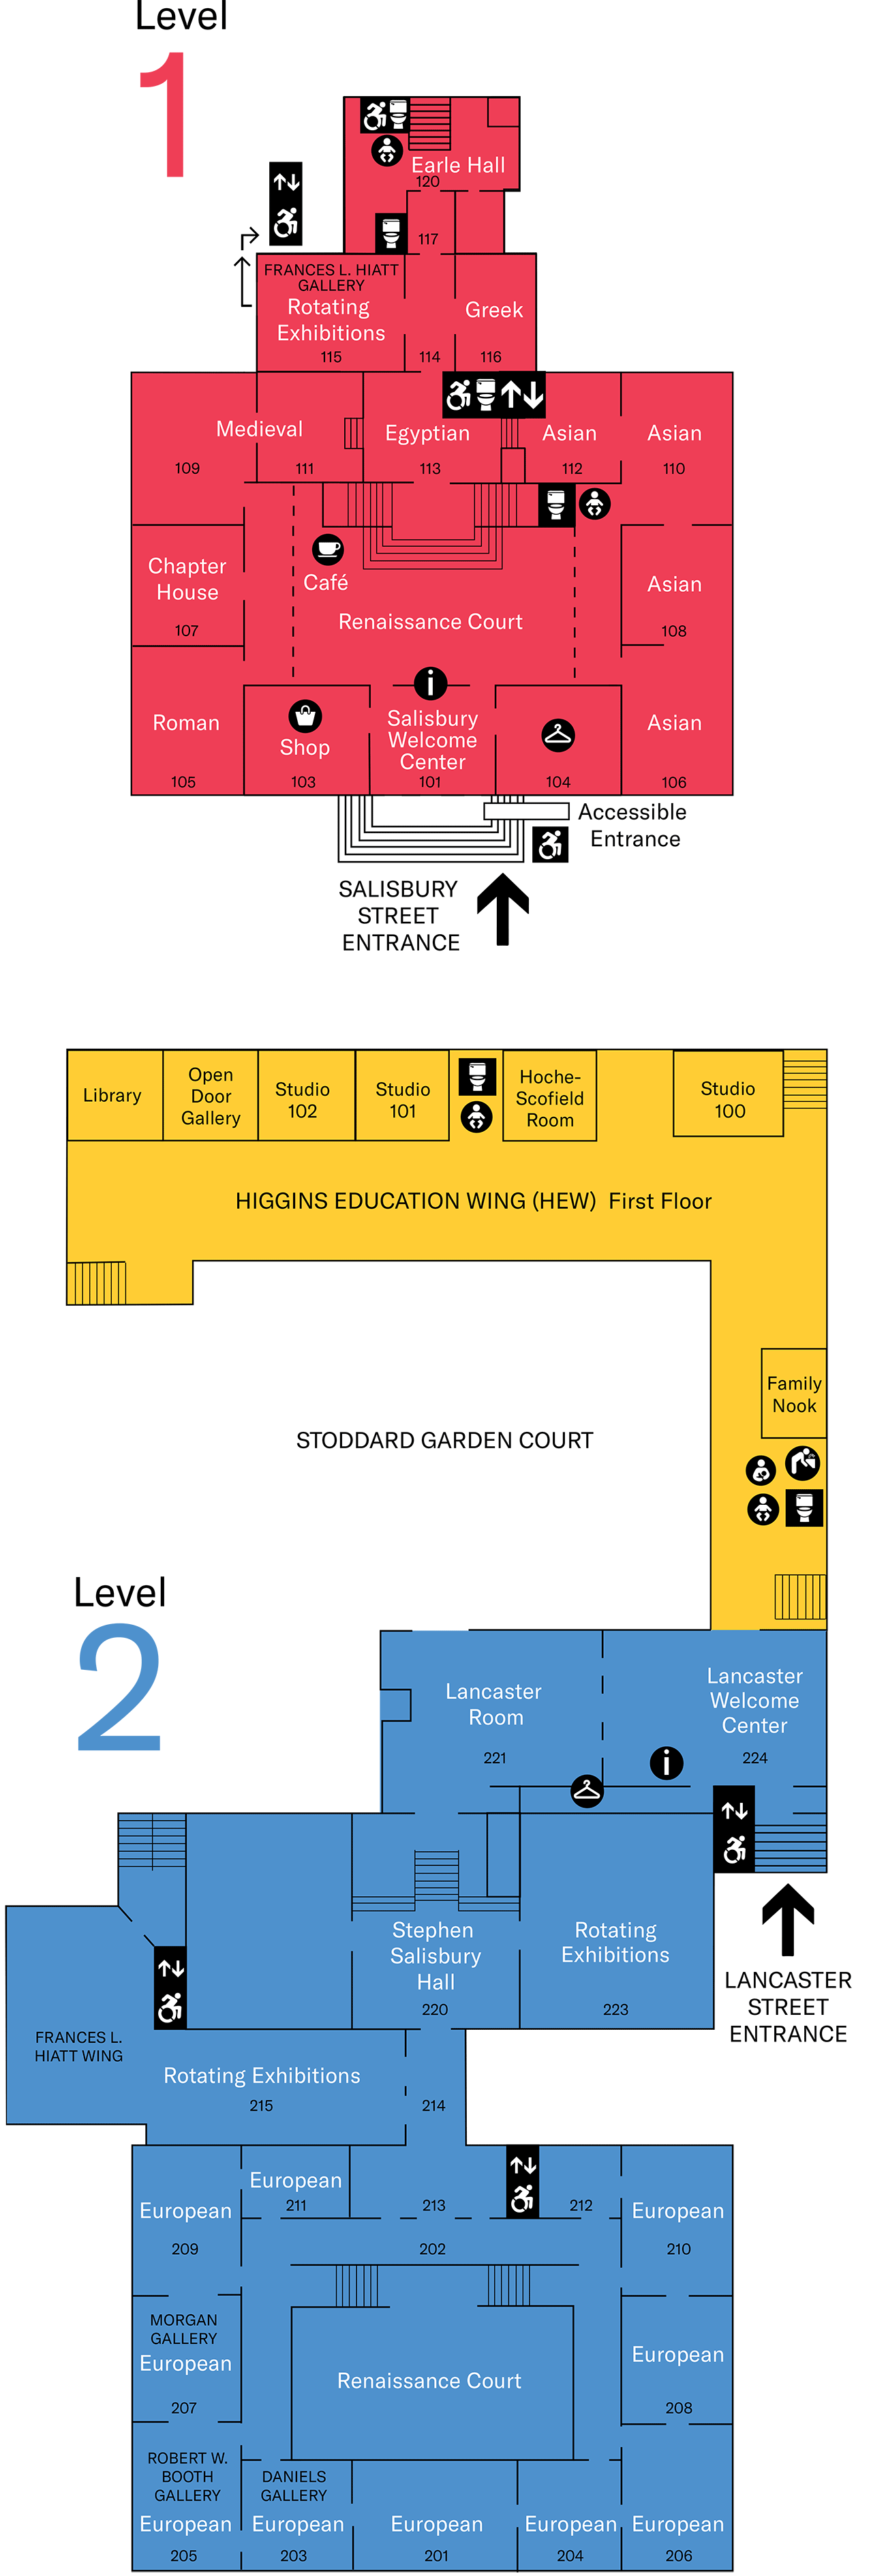 Floor map showing levels 1 and 2